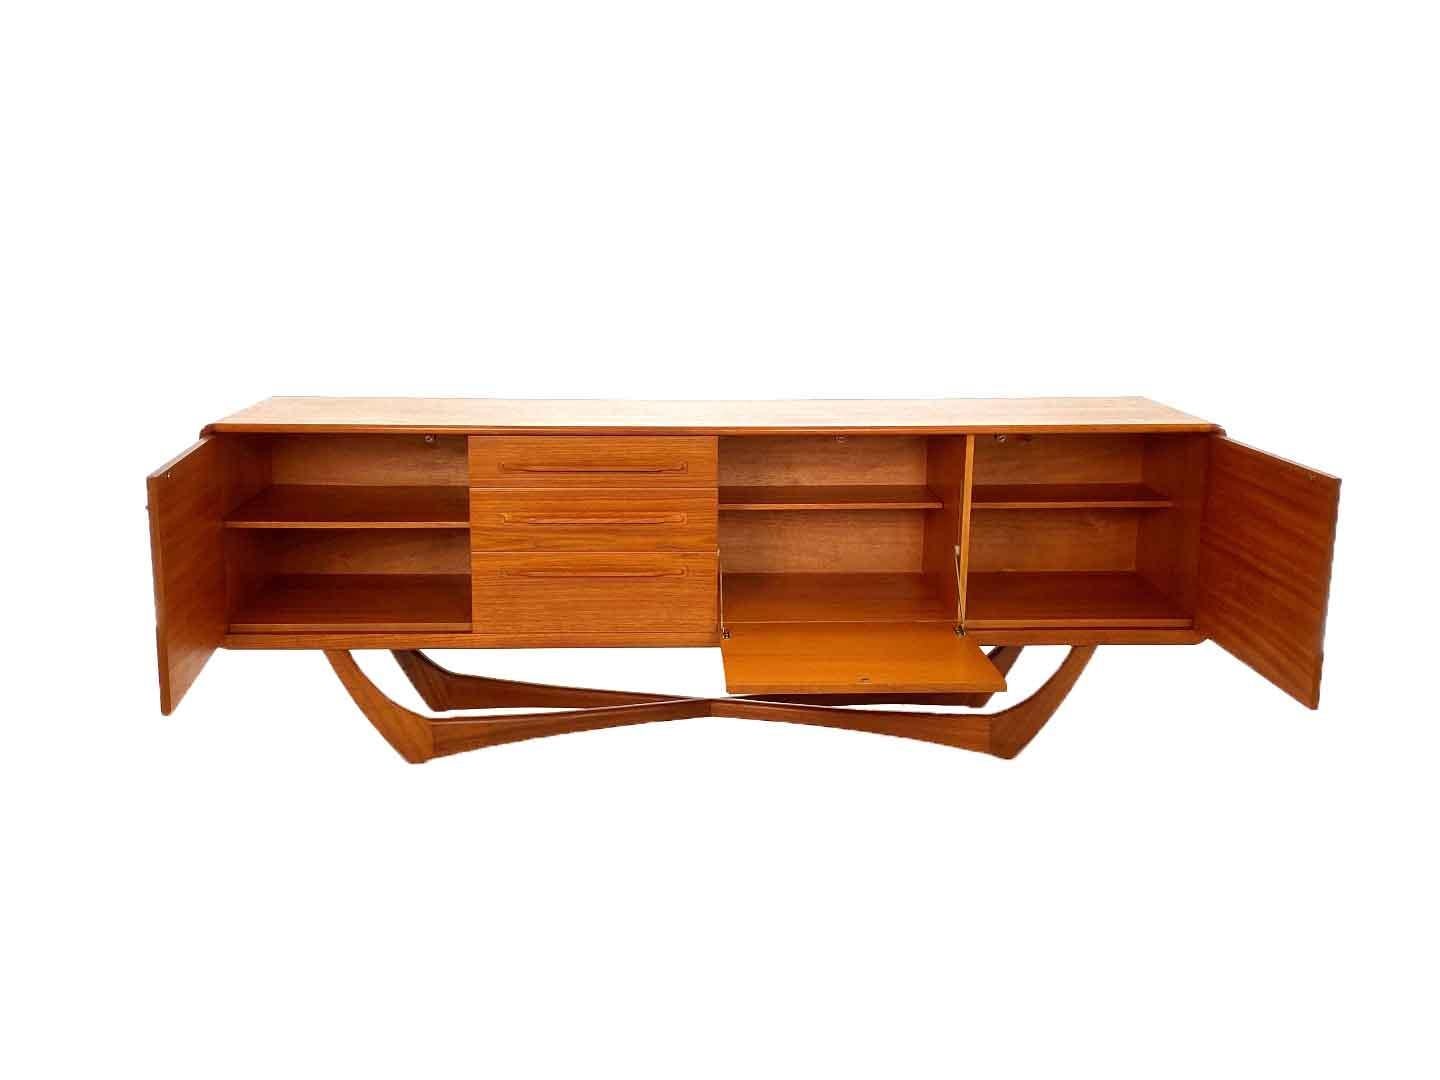 Rare vintage Beithcraft sideboard by Val Rossi produced in Scotland in the 60's. The sideboard has two doors, a cover and three drawers. The sideboard is very unique through its consistent crossed legs, also called spiderlegs. Through the very